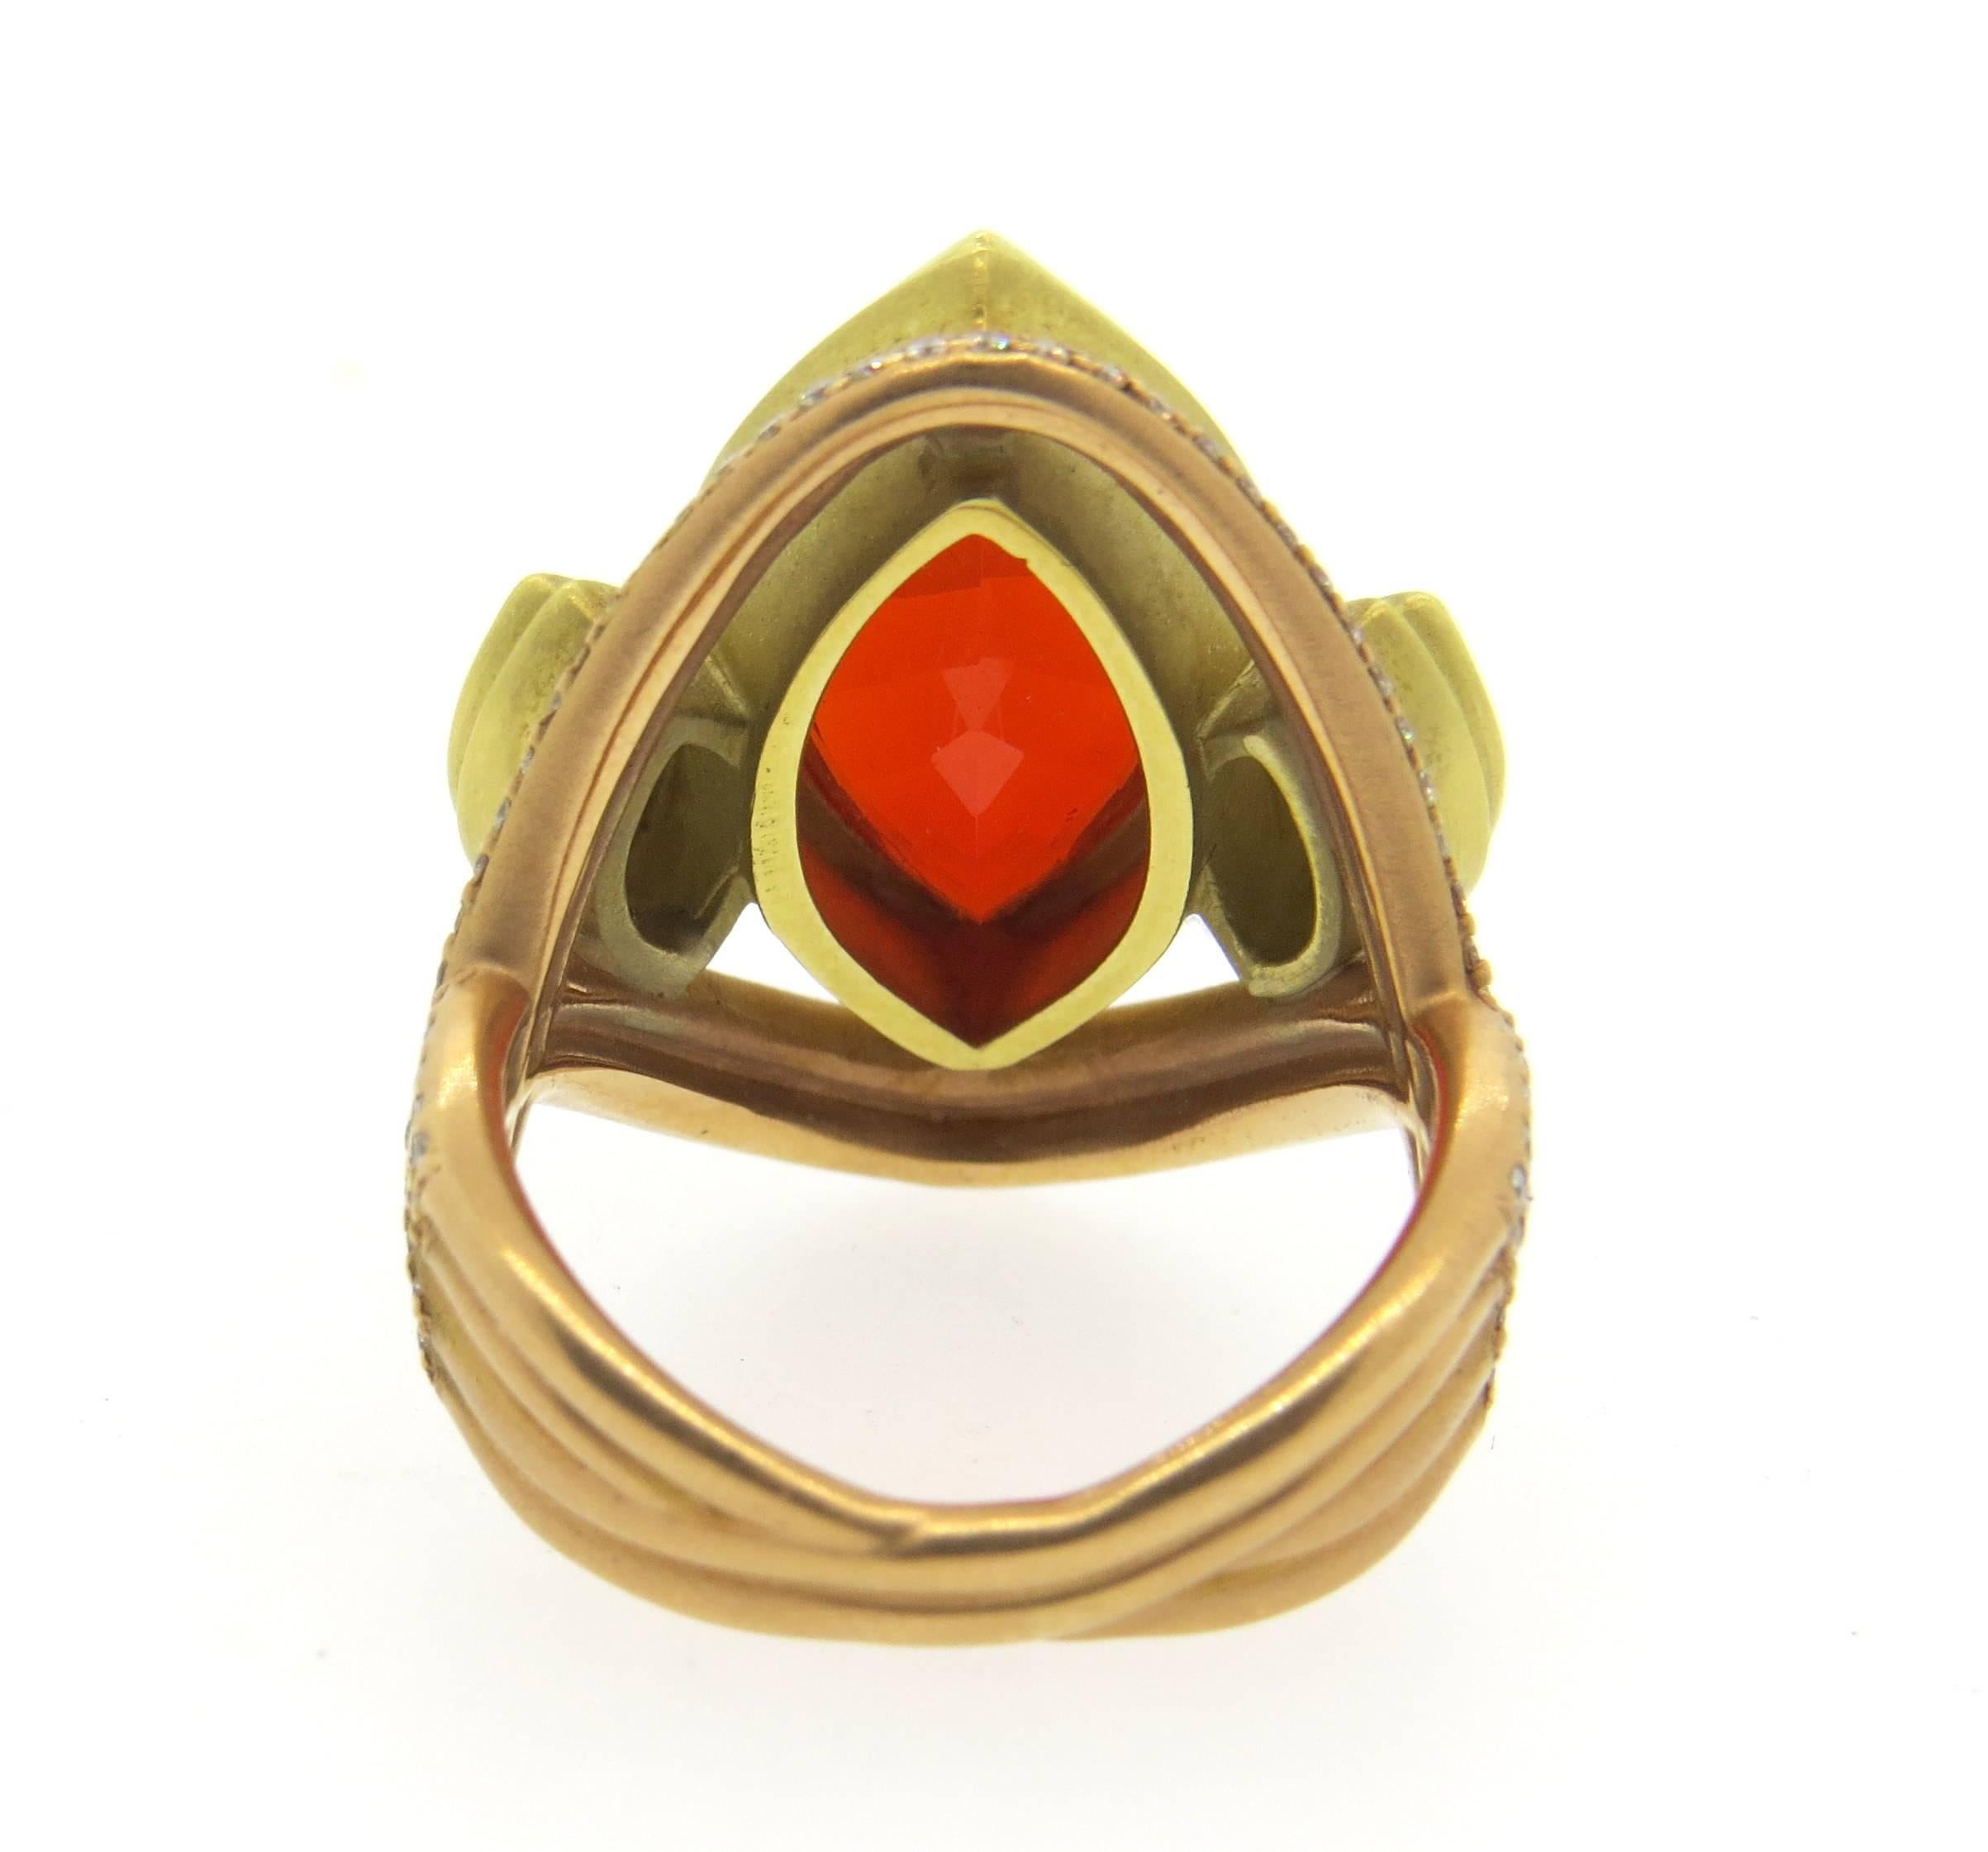 Impressive 18k yellow and rose gold ring, crafted by Sam Lehr, set with large  21.5mm x 11.5mm Mexican fire opal, surrounded with approximately 2.00ctw in G/VS diamonds. Ring is a size 8 1/2, ring top is 28mm x 23mm. Marked with Makers mark,750.